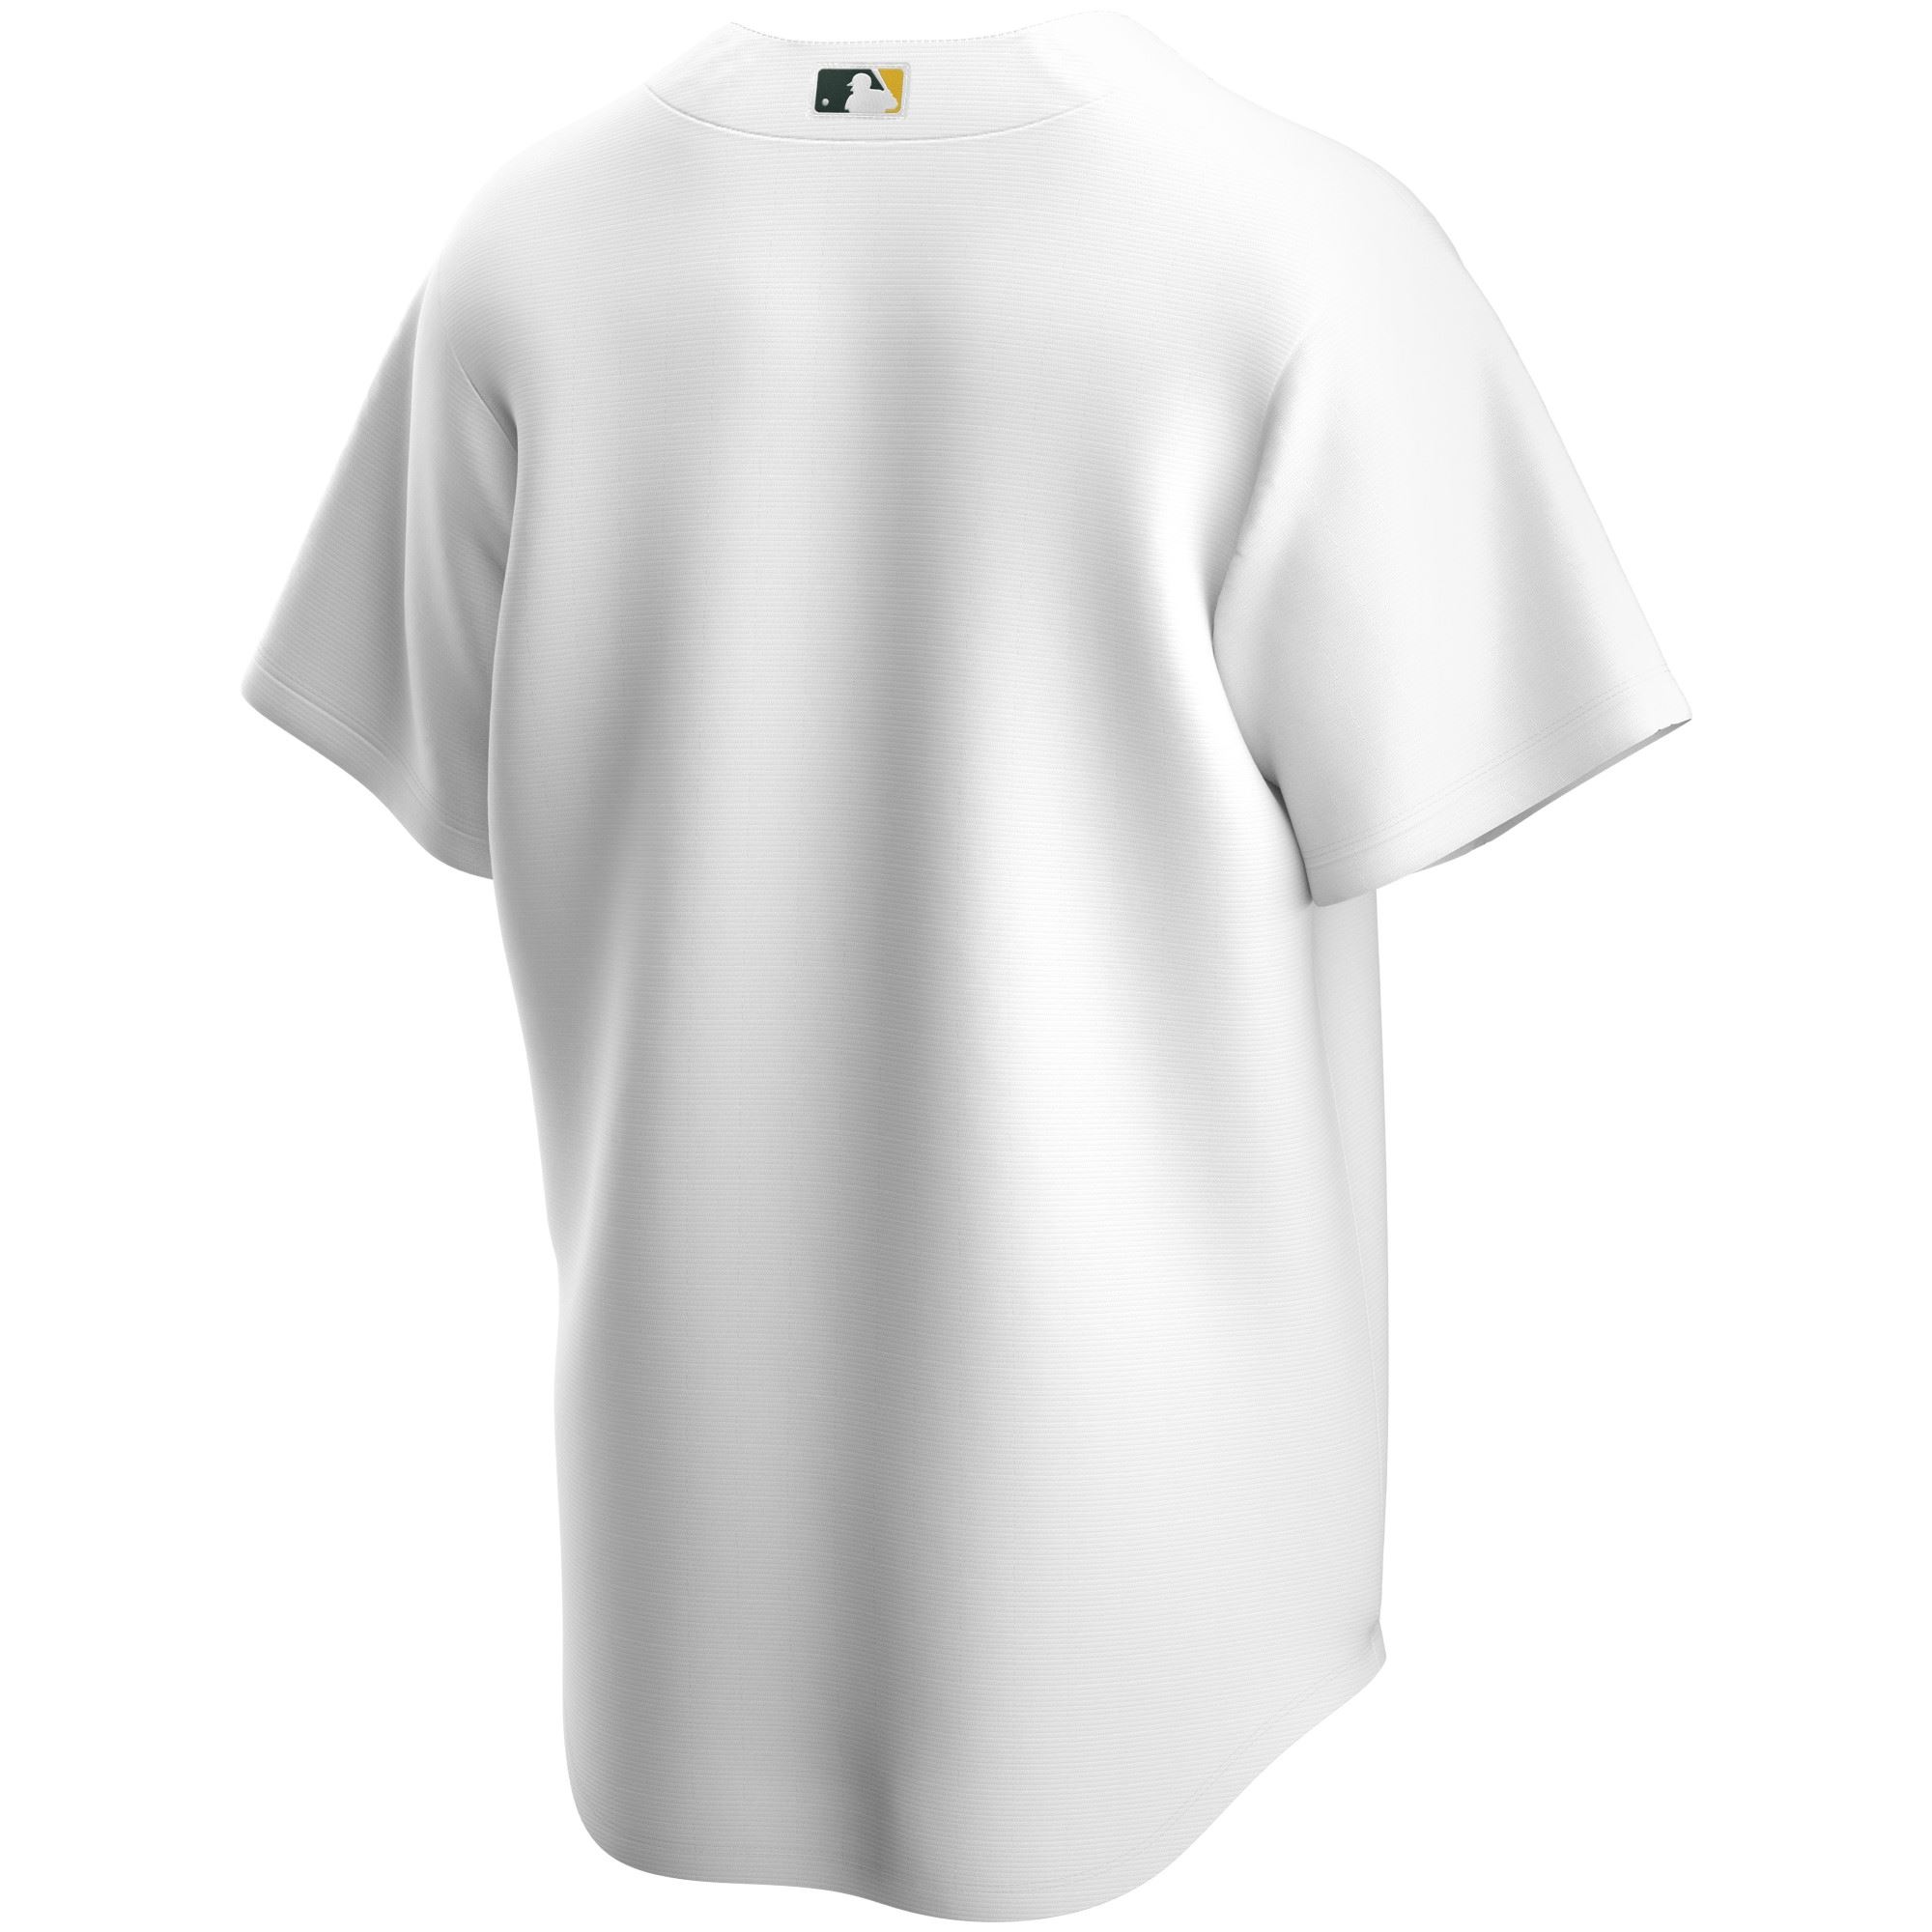 Oakland Athletics Official MLB Replica Home Jersey White Nike